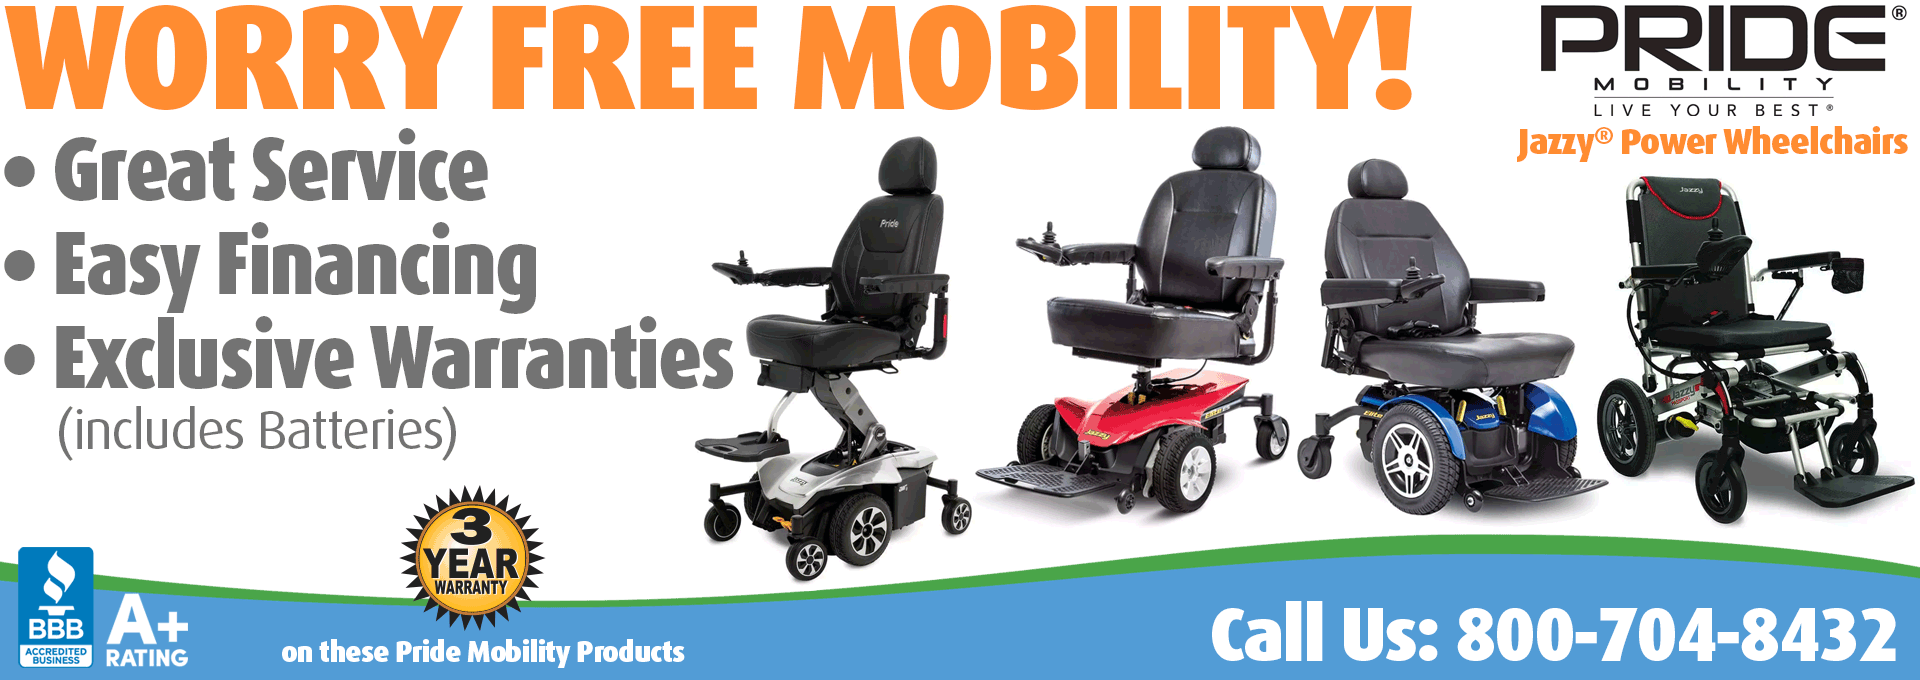 Living Well Stores Sells Jazzy® Power Wheelchairs by Pride Mobility with our own Great Warranties